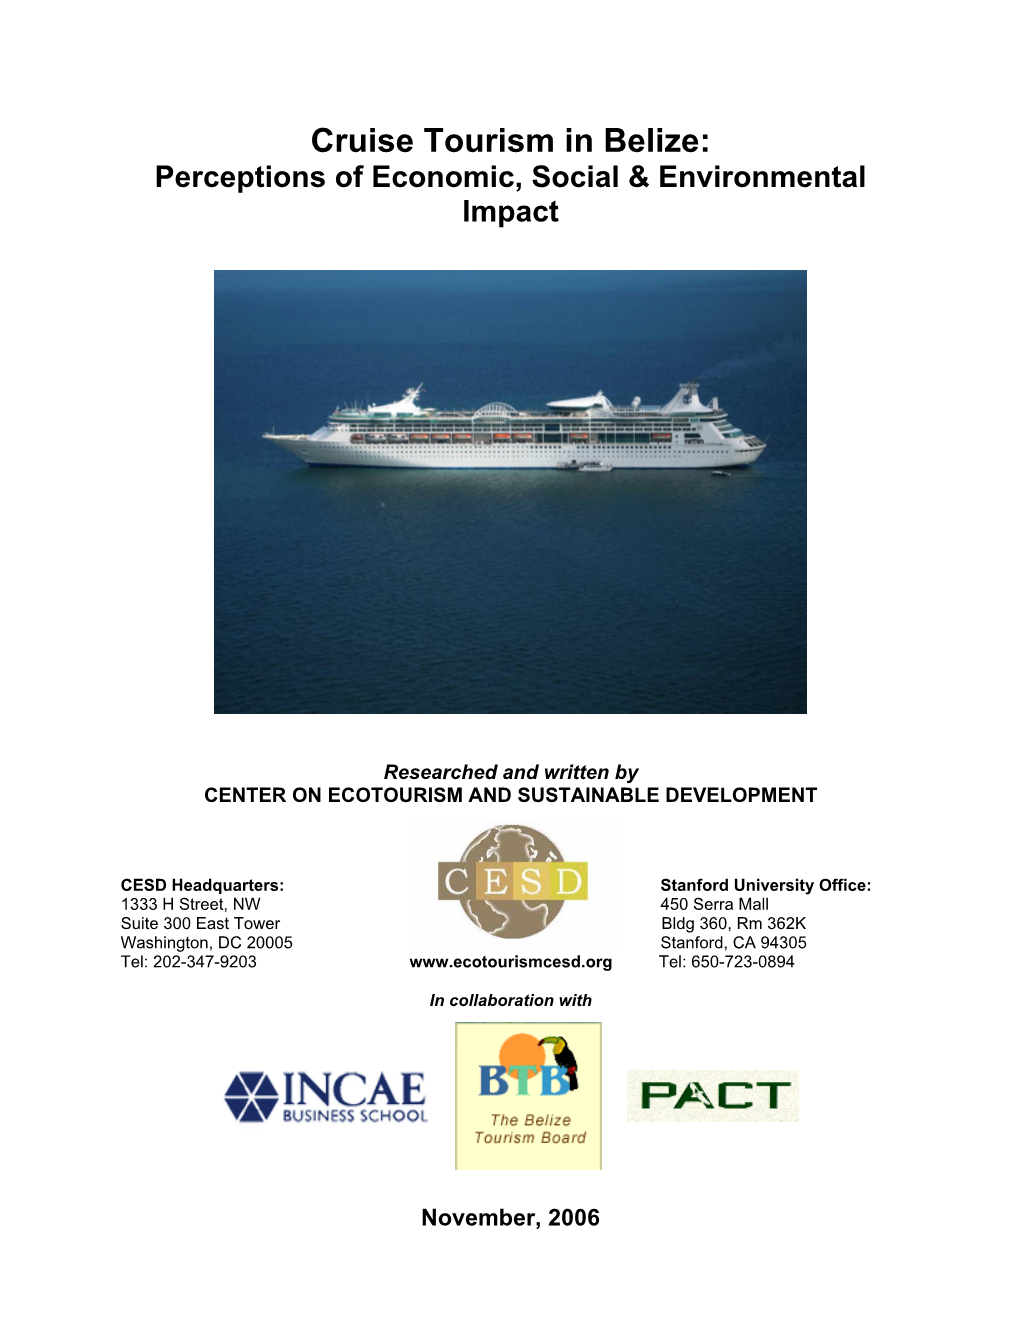 Terrestrial Impacts of Cruise Tourism in Belize